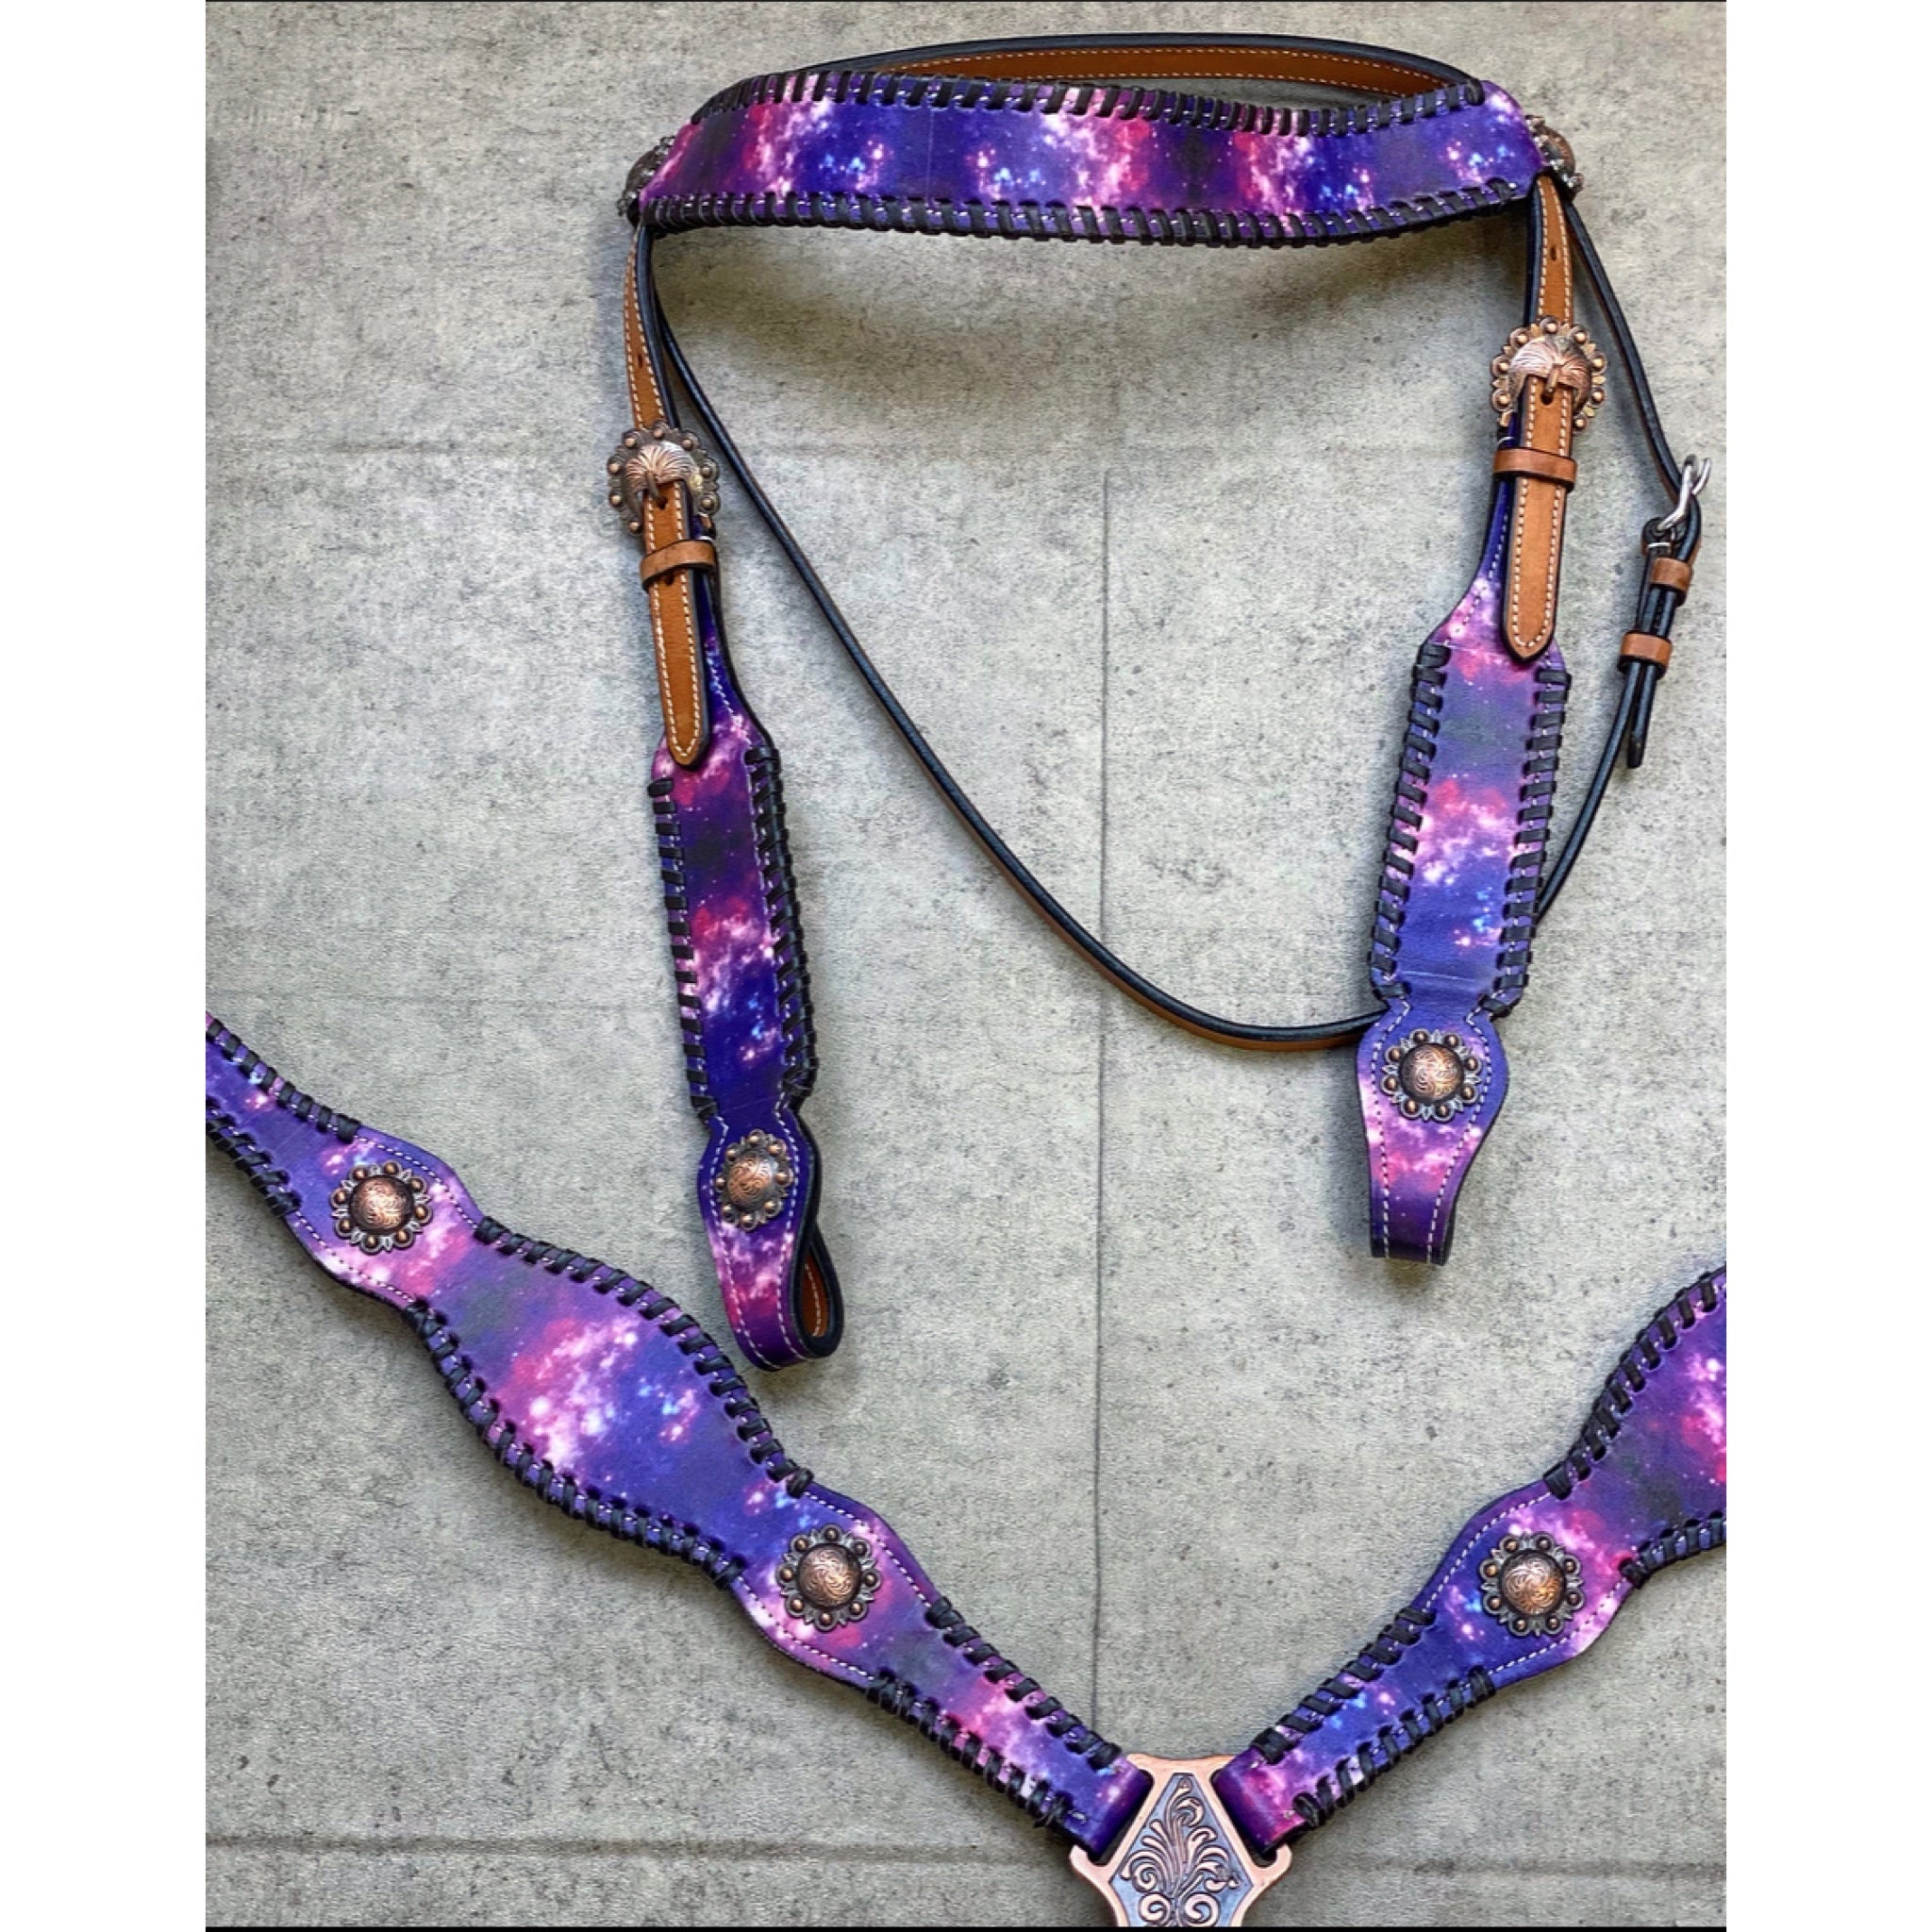 Teal Serape Headstall and Breast Collar Set